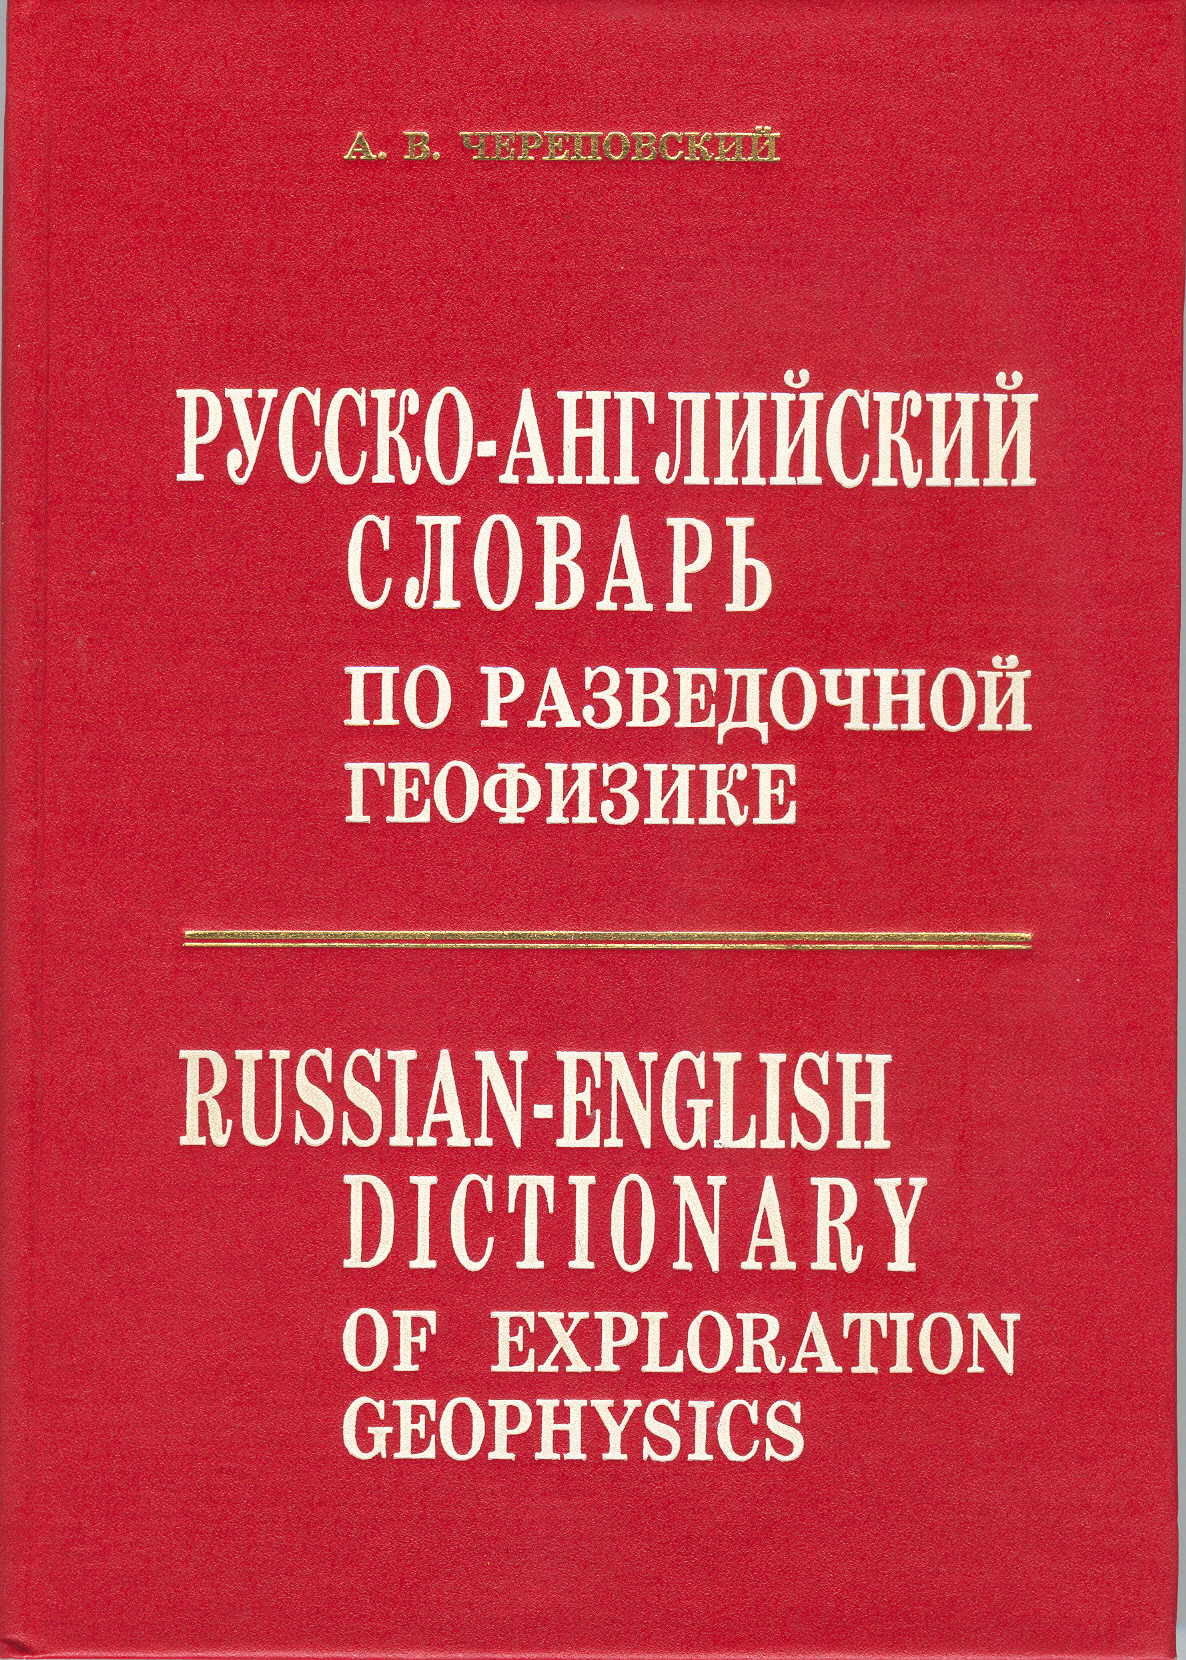 English russian english dictionary on leather and foot wear industry polyglossum 3.52